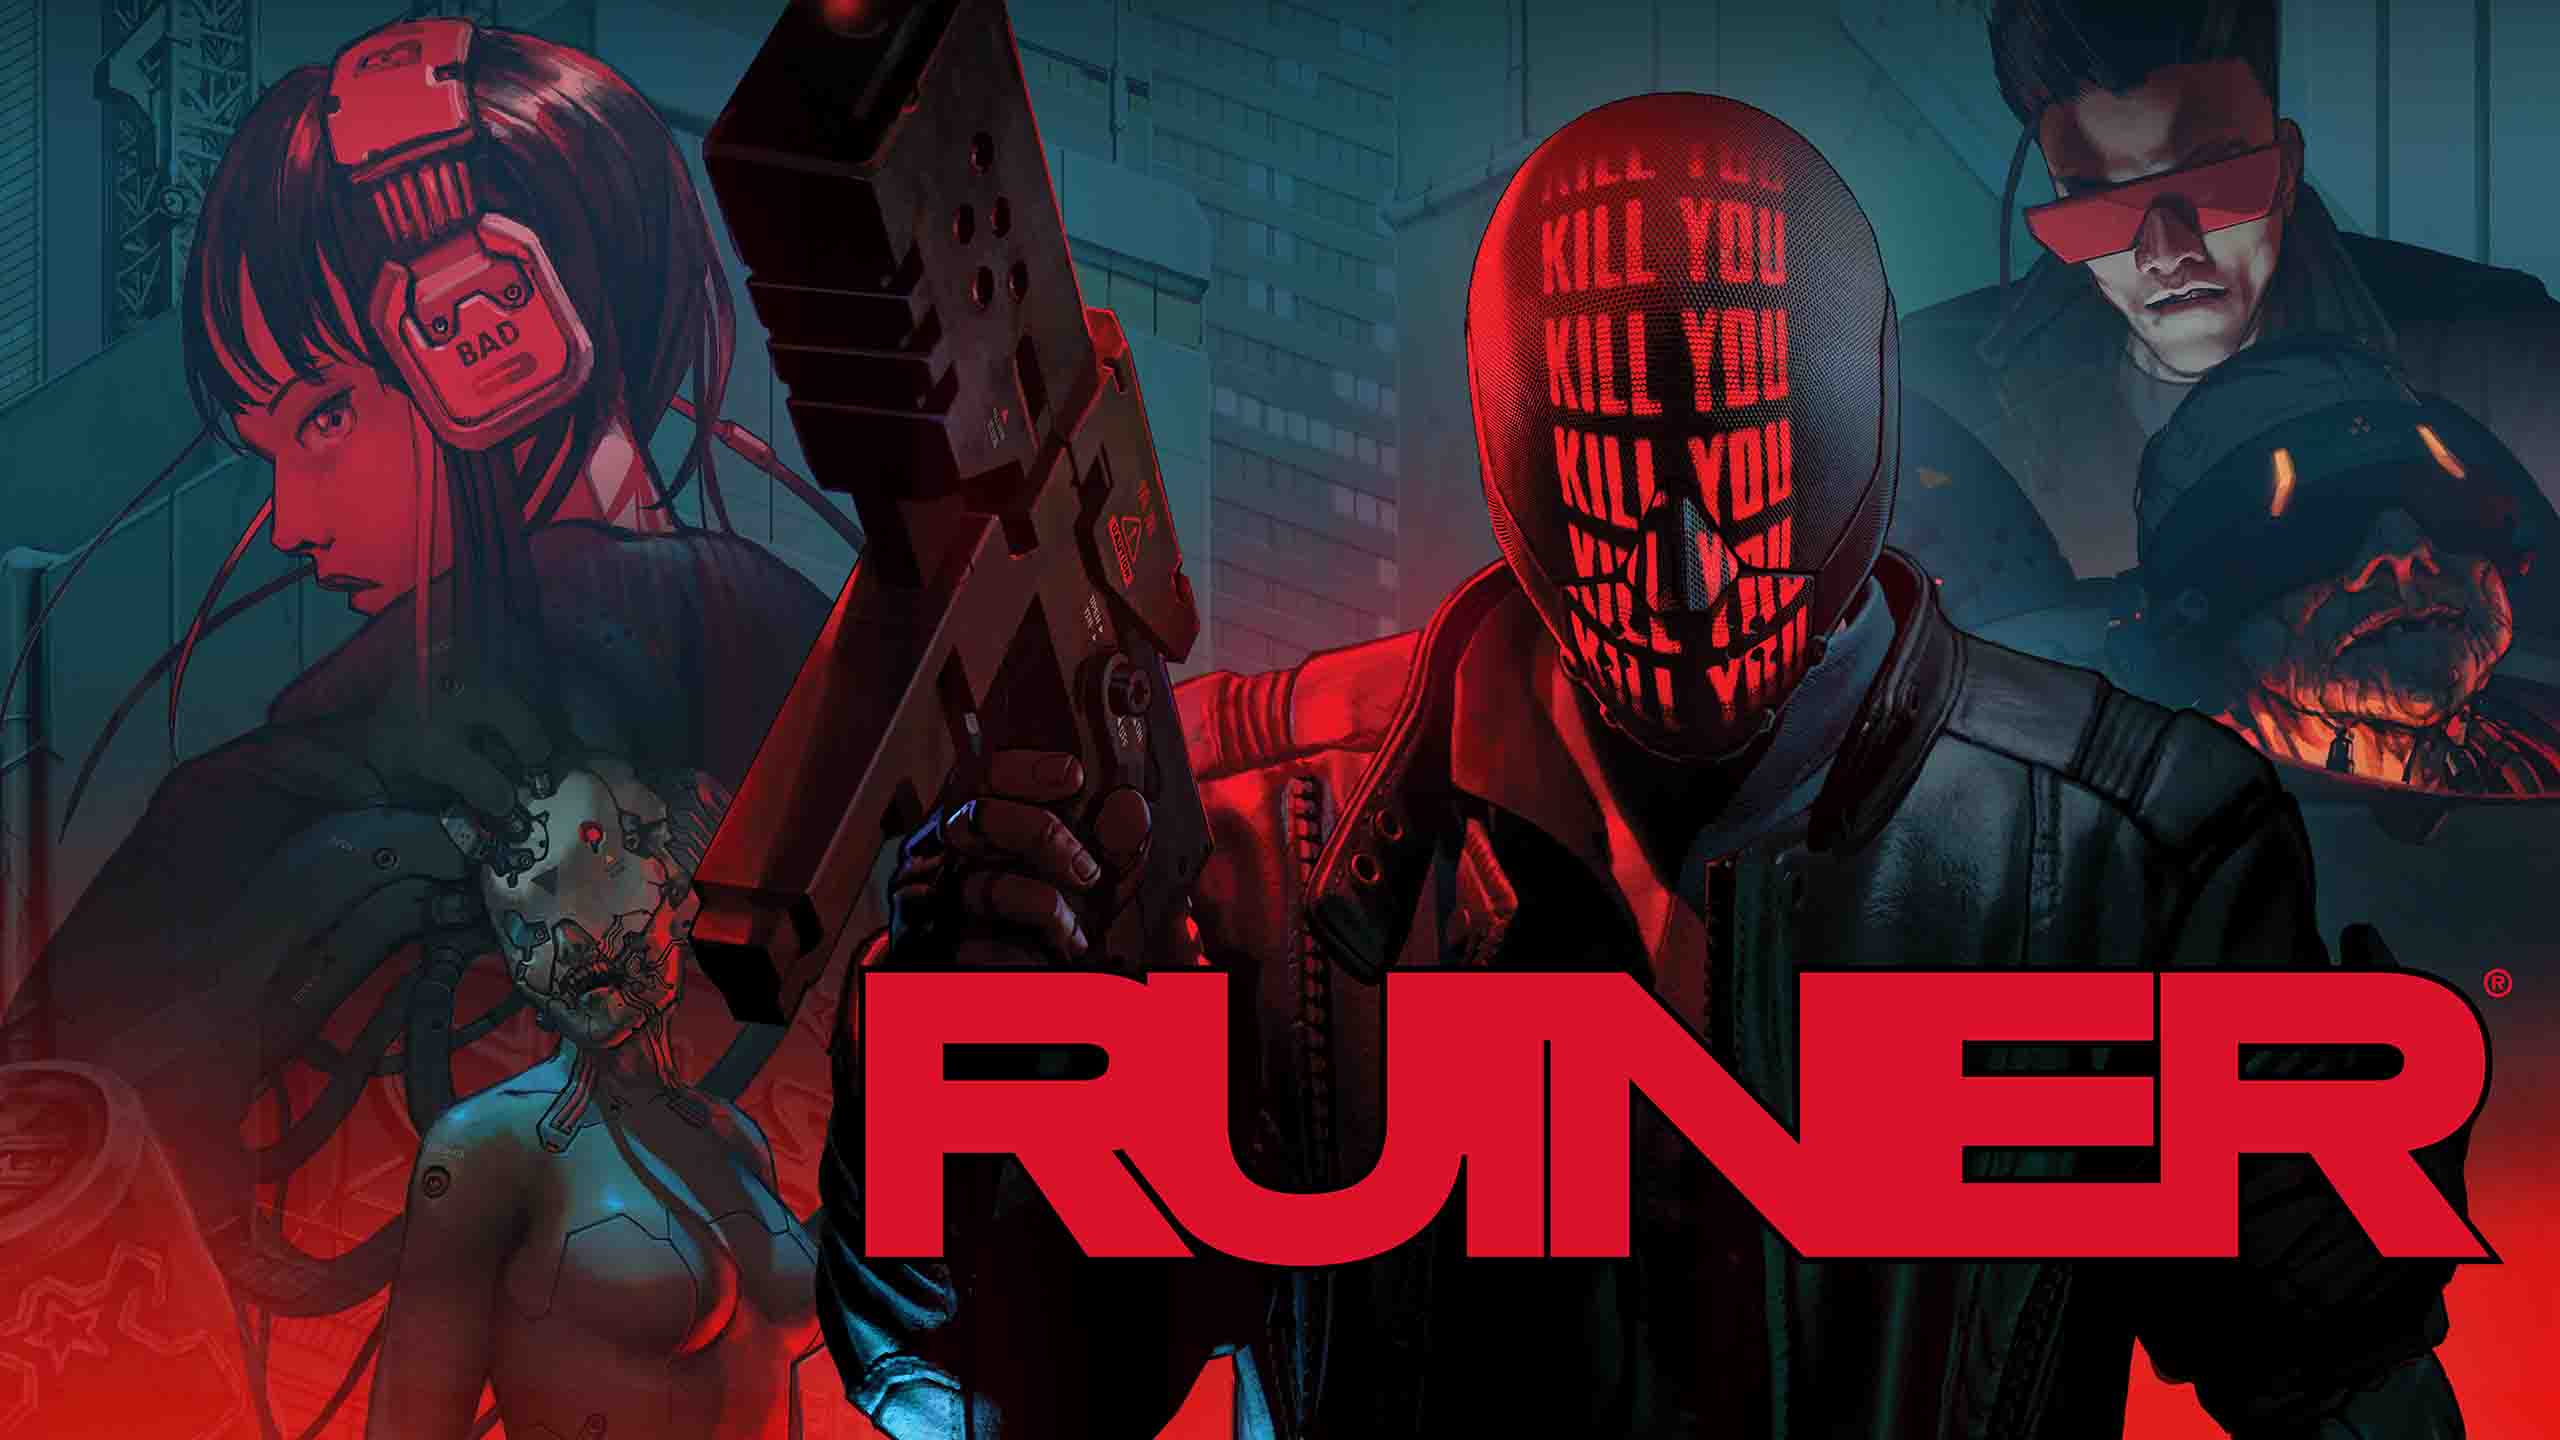 RUINER System Requirements for PC Games minimum, recommended specifications for Windows, CPU, OS, Processor, RAM Memory, Storage, and GPU.